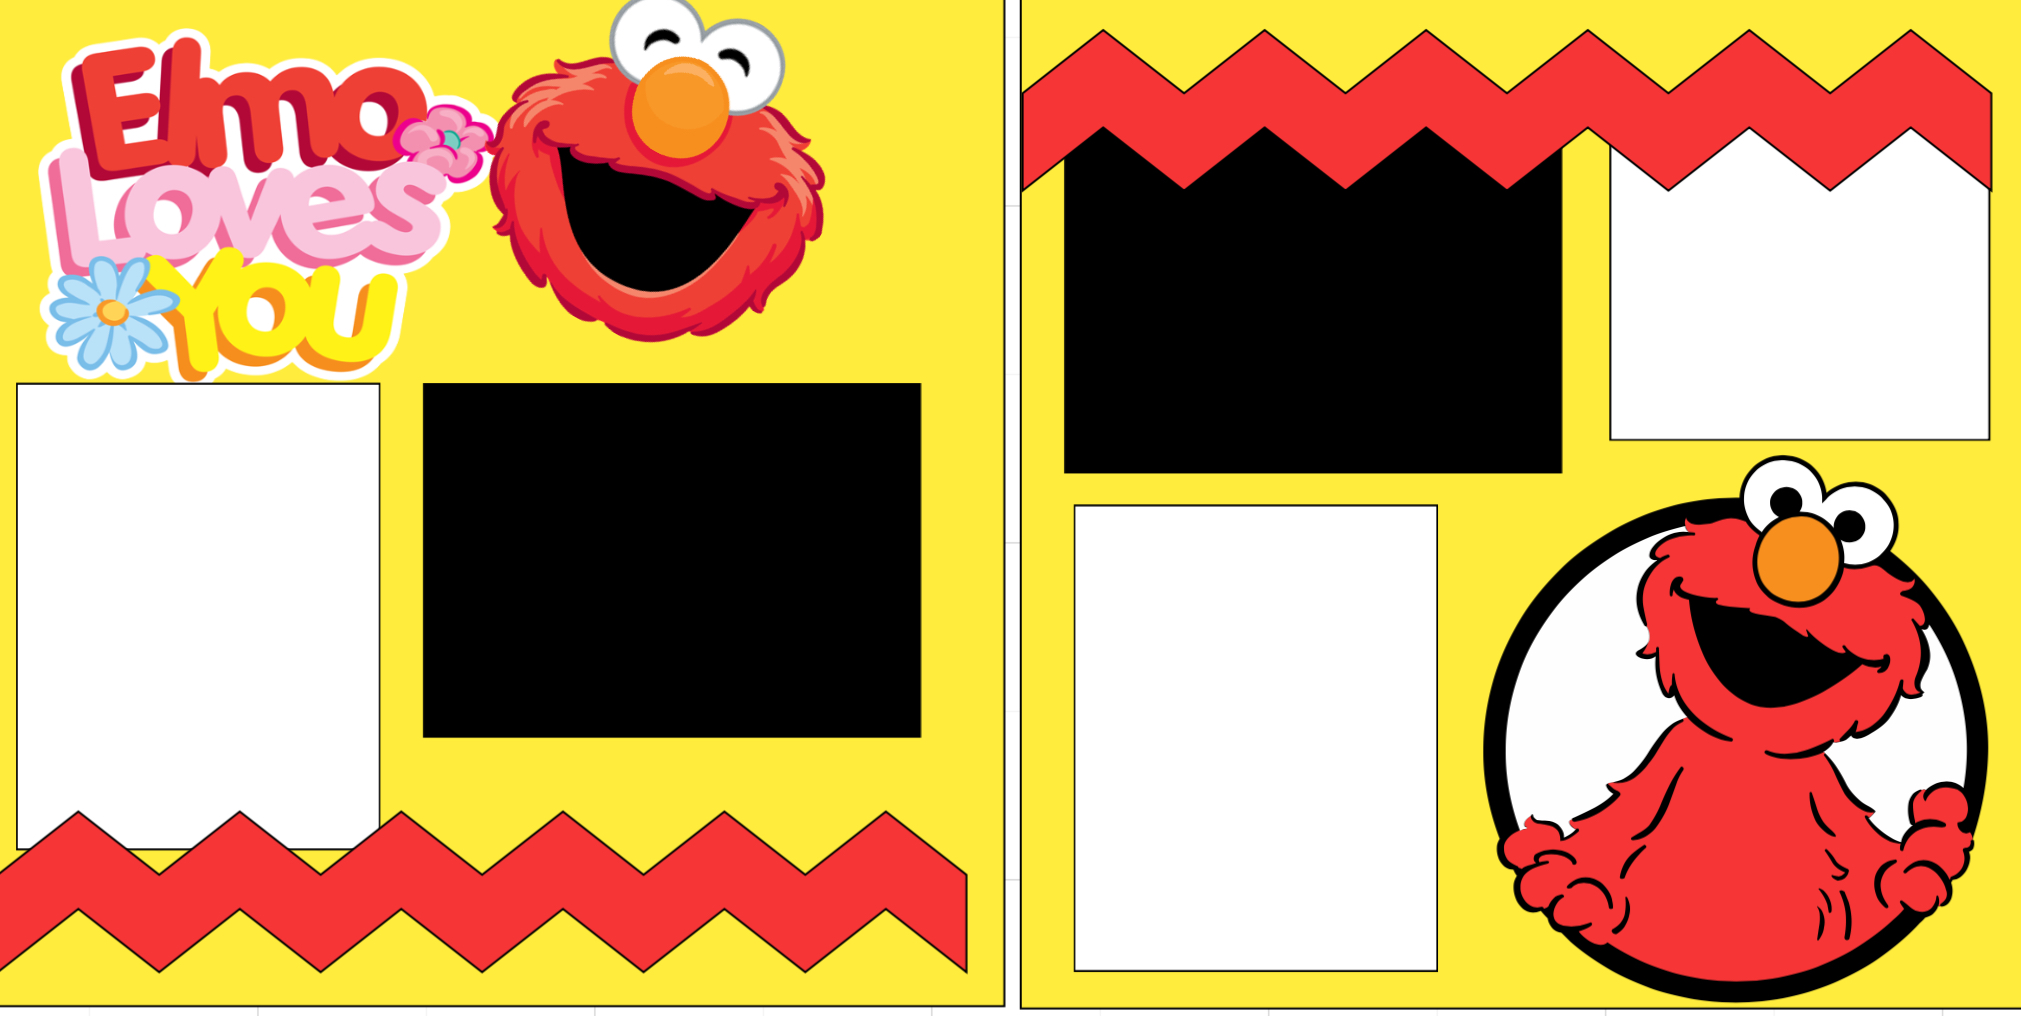 Elmo loves you-  page kit